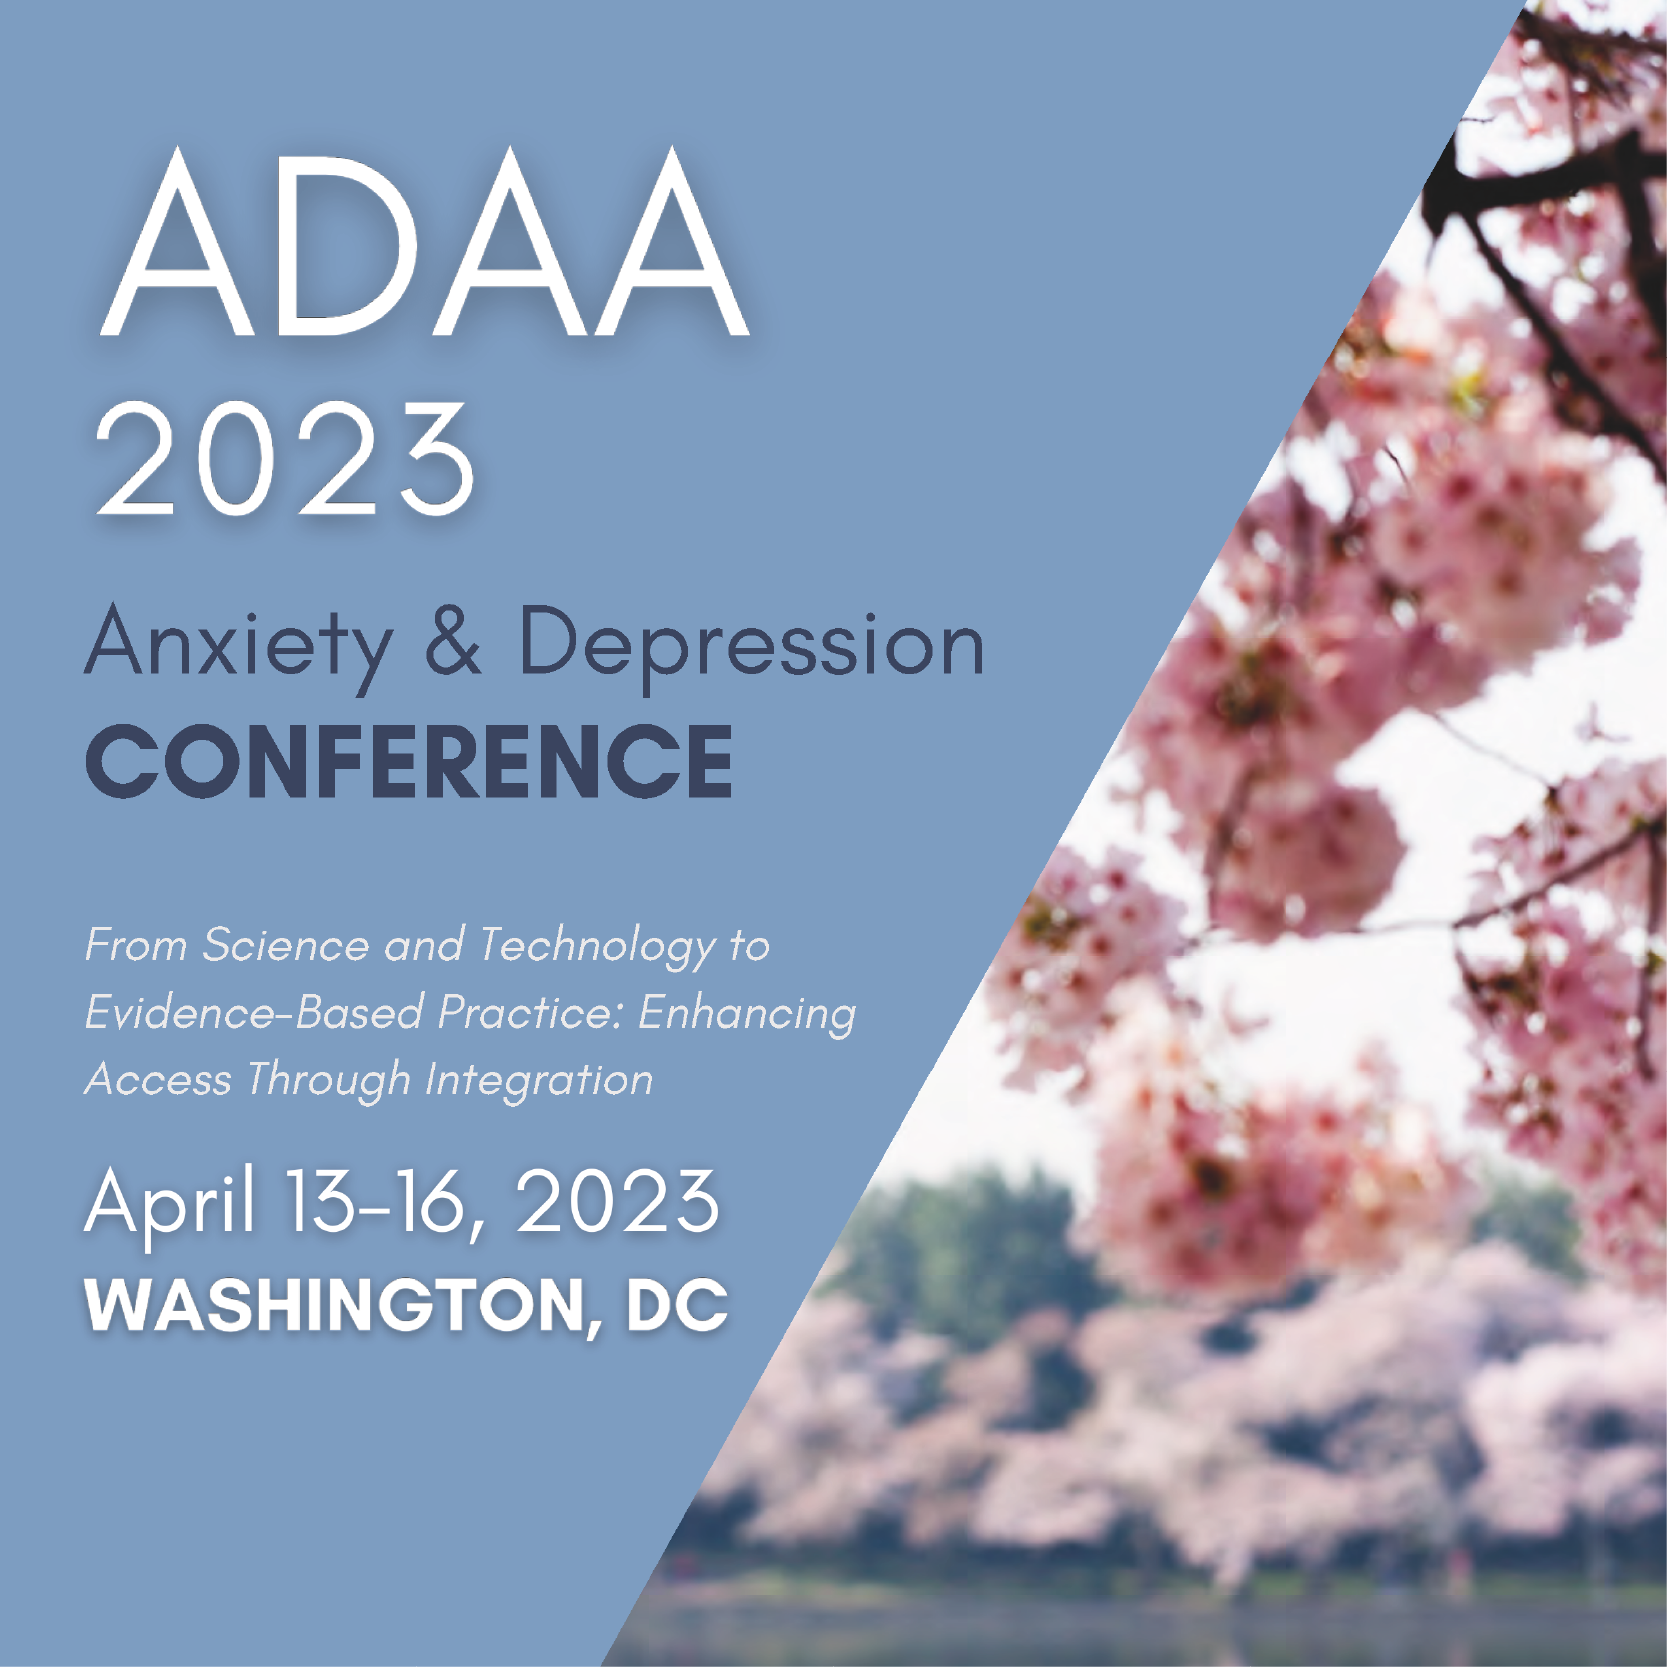 Medflixs Anxiety And Depression Conference ADAA 2023